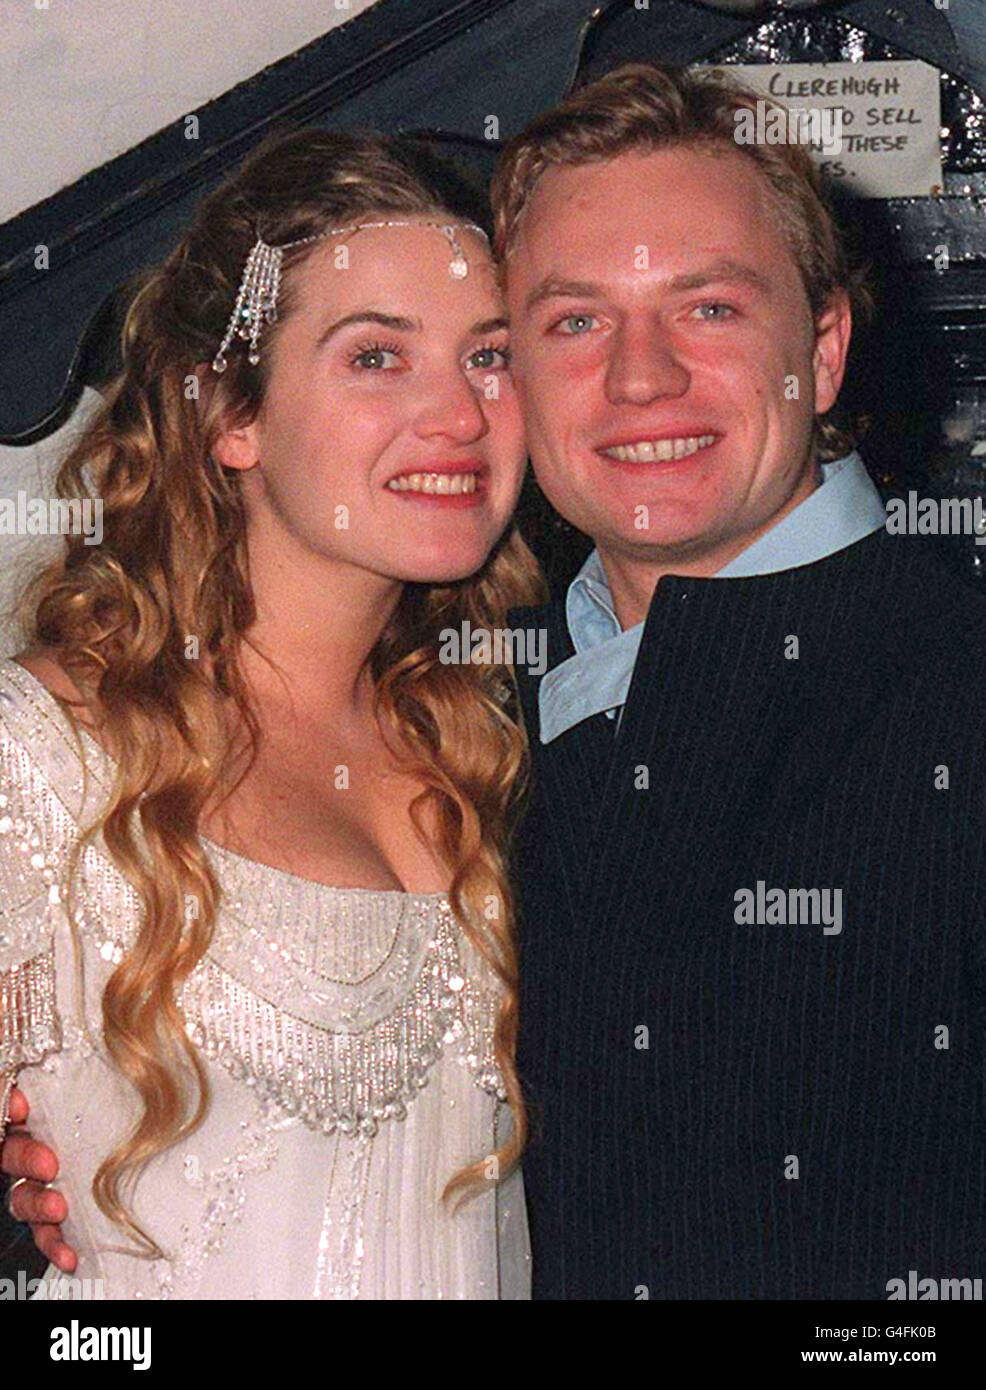 Actress Kate Winslet and new husband Jim Threapleton at their wedding  reception in the Crooked Billet pub in Stoke Row, Oxfordshire. * 3/9/01:  Movie star Winslet and husband Threapleton are separating, the